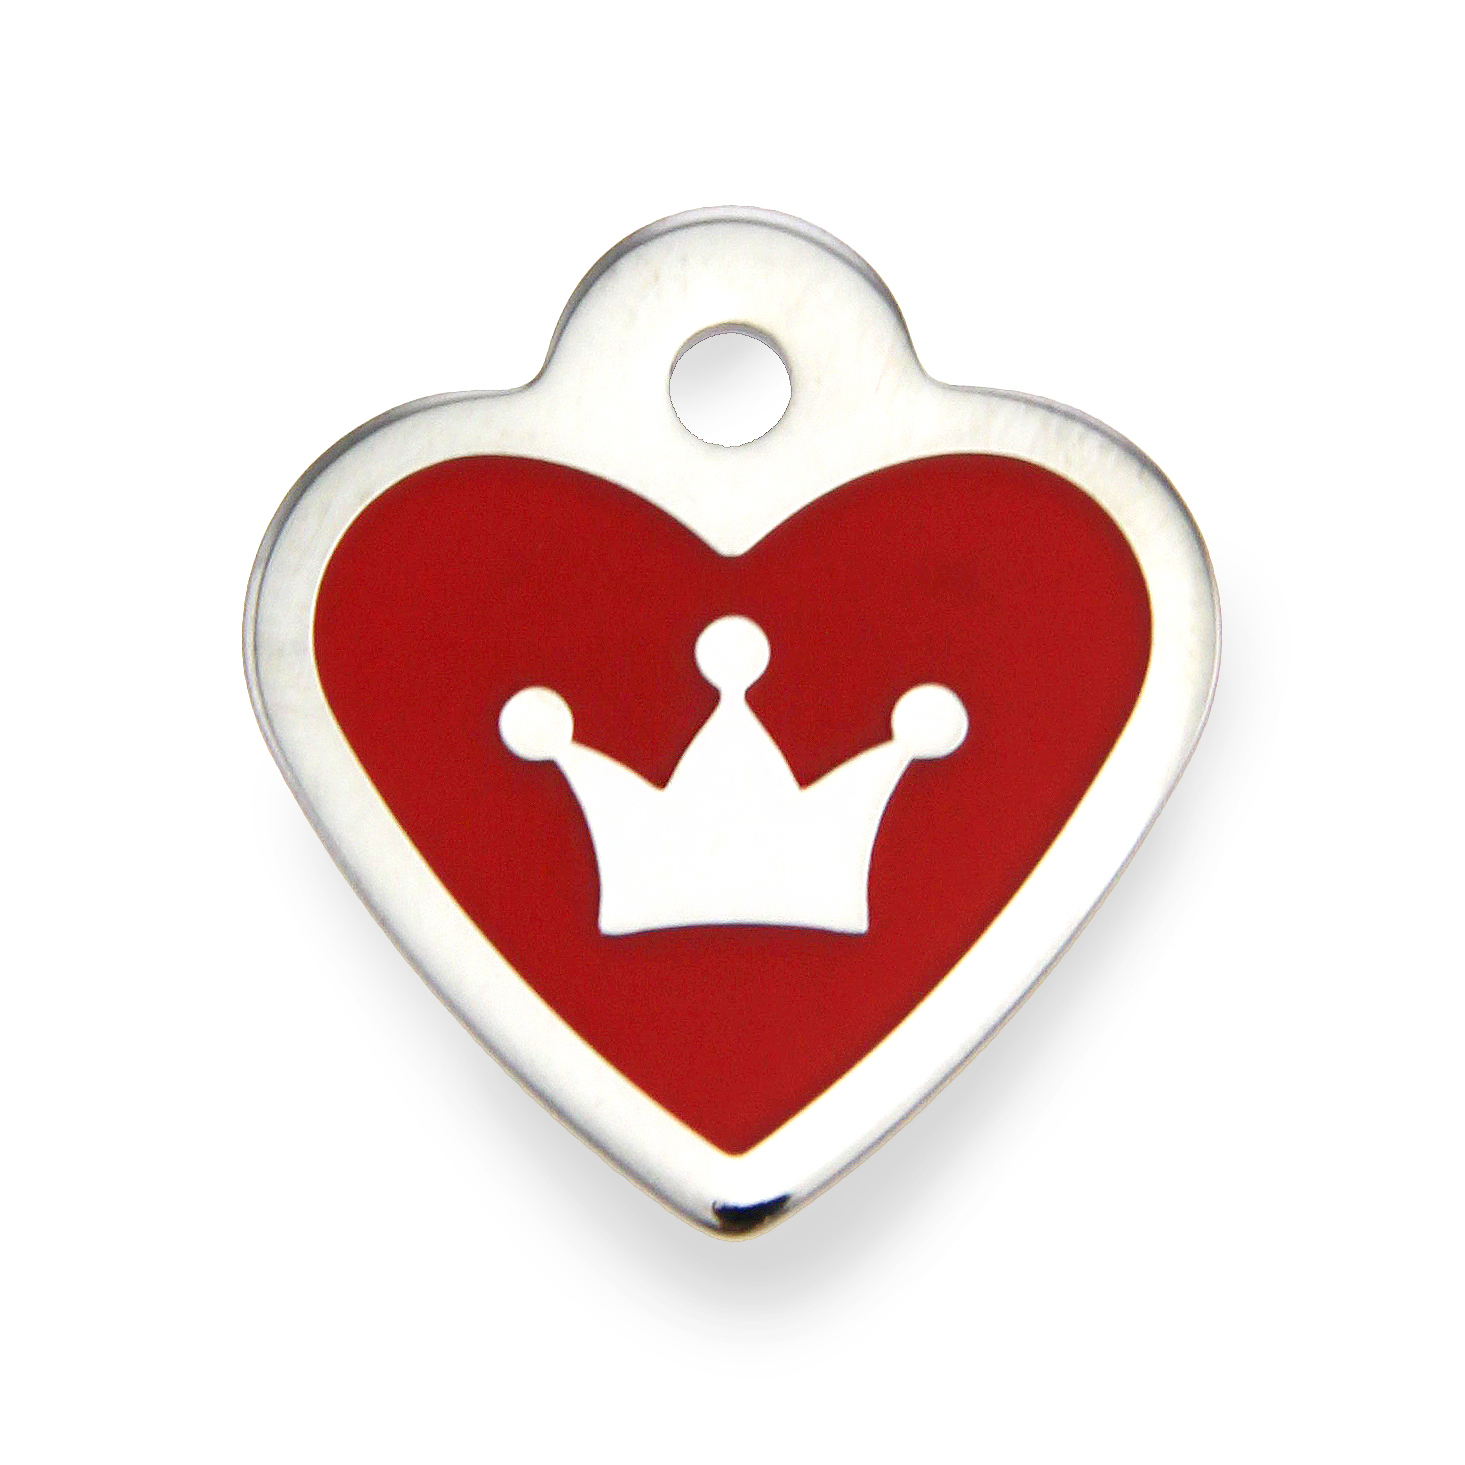 Crown Heart Small Engravable Pet I.D. Tag - Chrome and Red